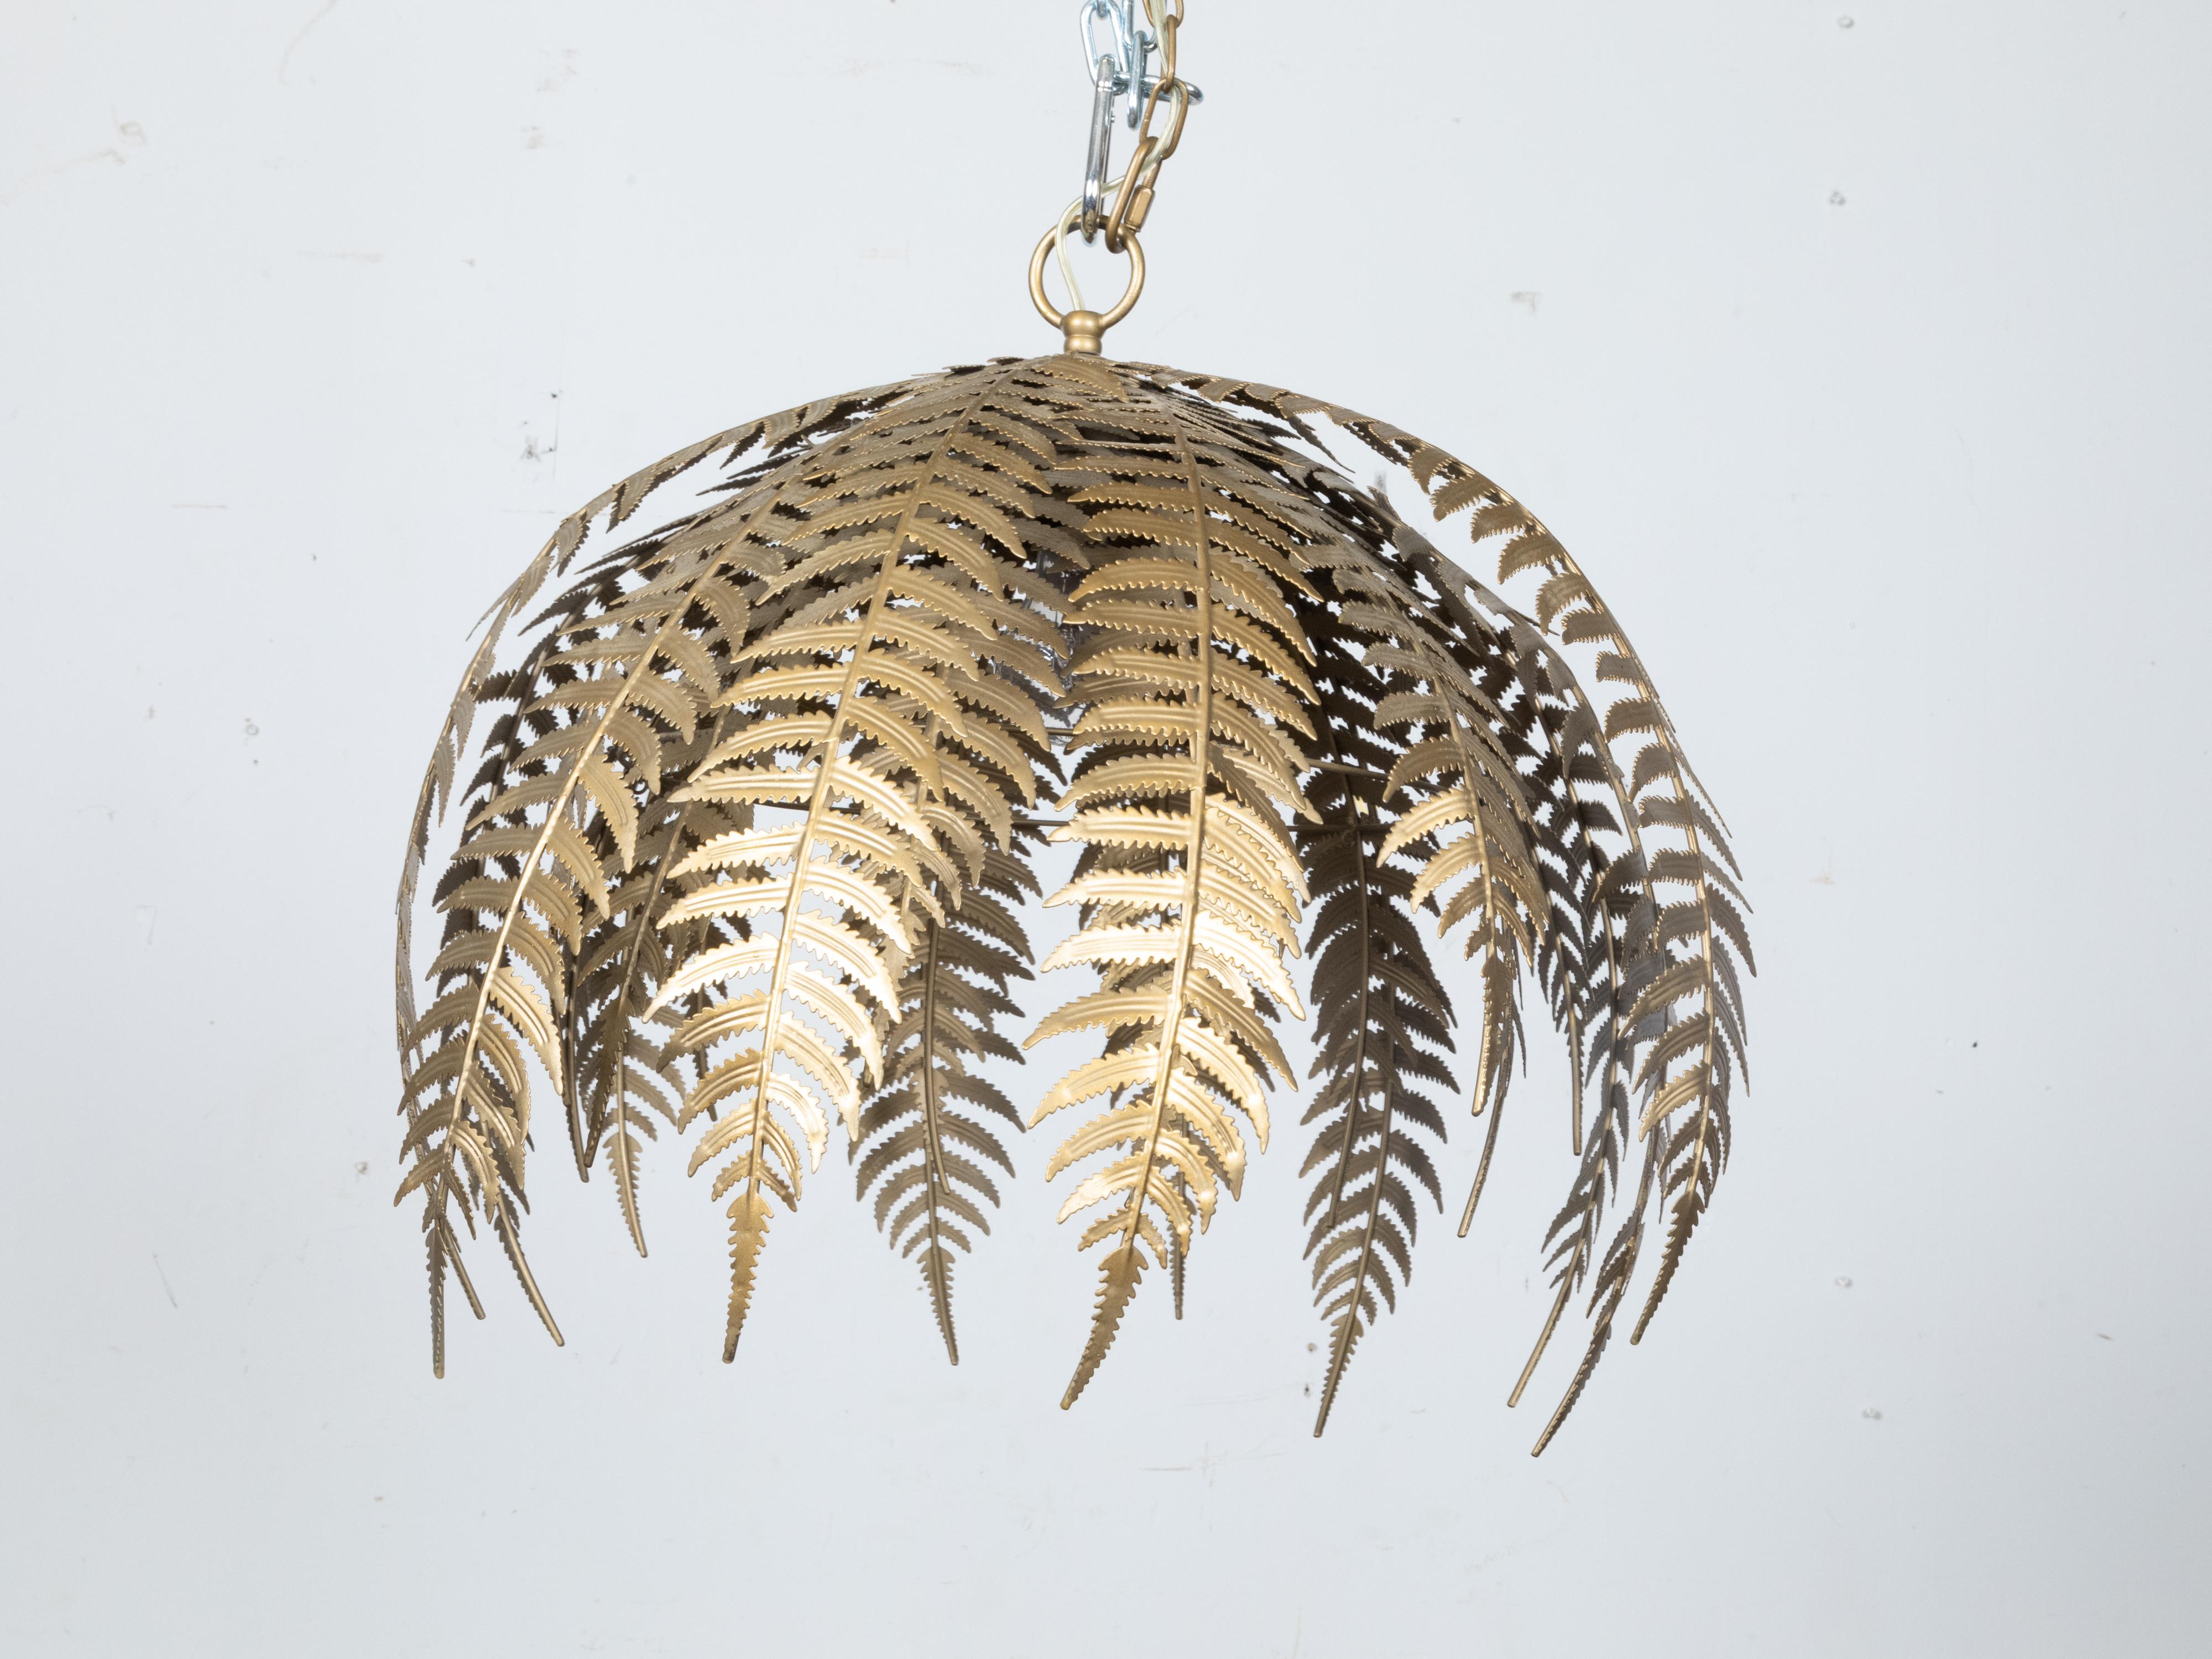 French Midcentury Gilt Metal Fern Chandelier with Single Light, Wired for the US 3